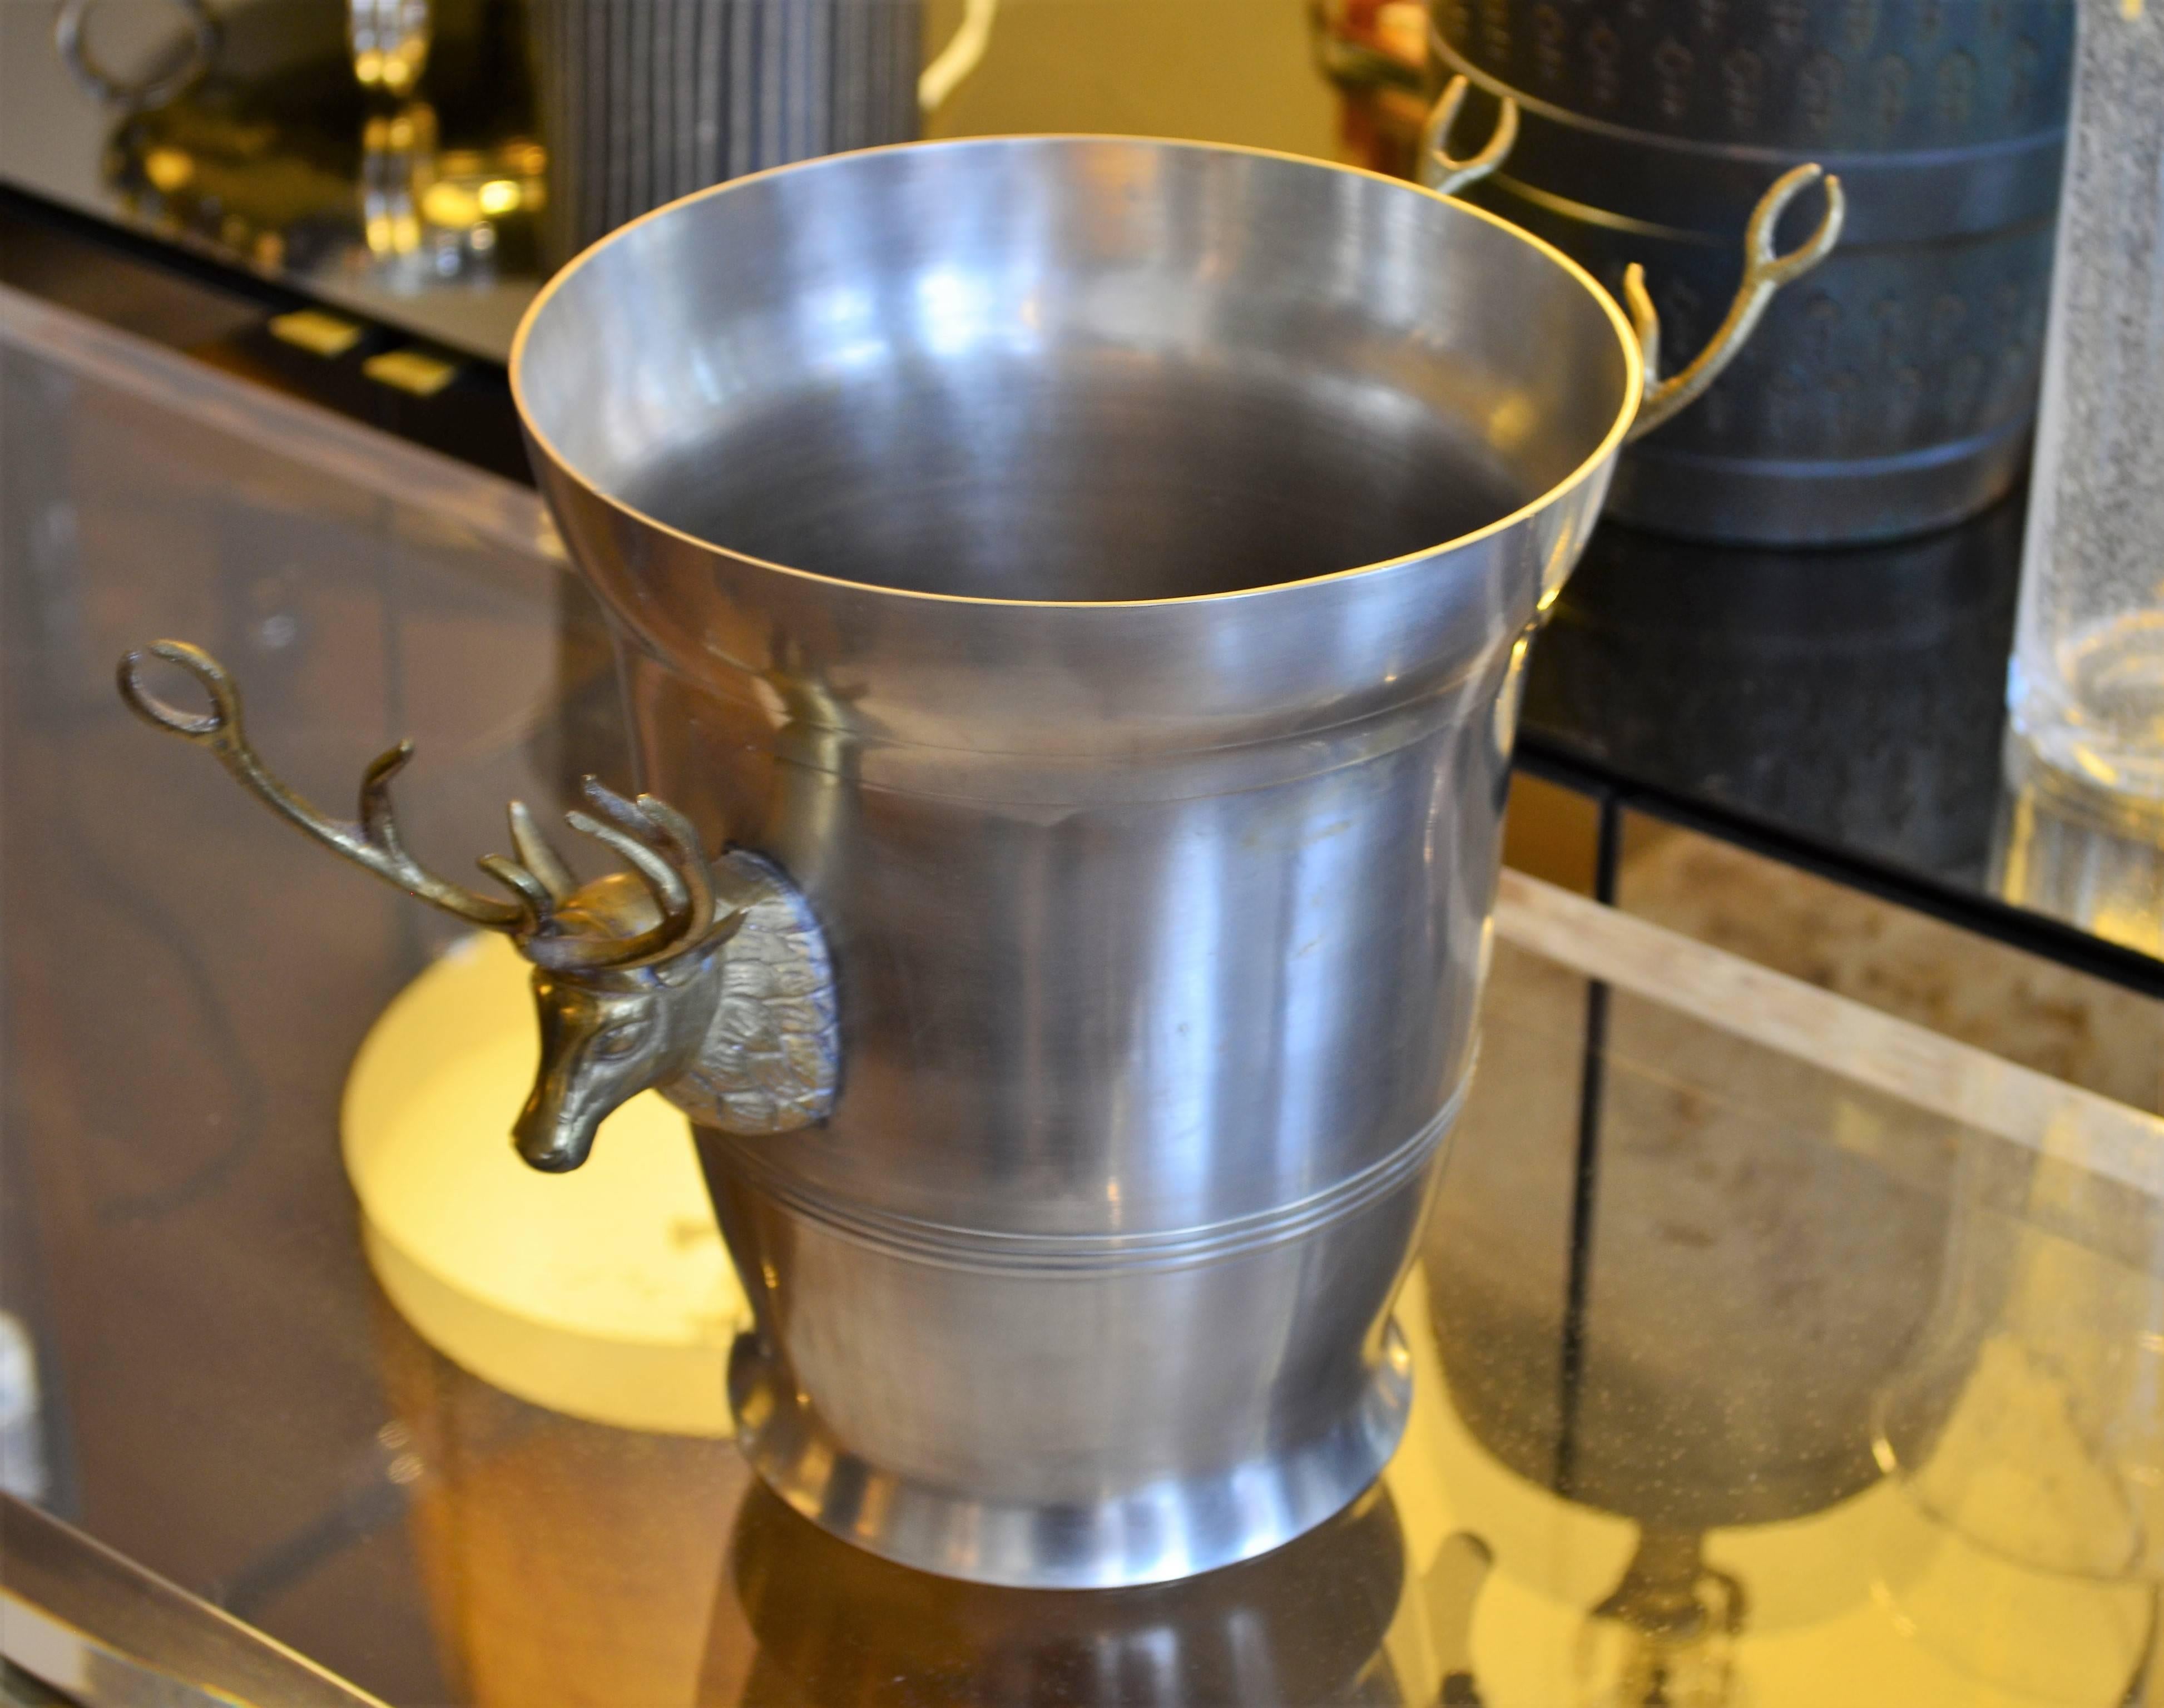 Highly decorative metal wine bucket with large-scale brass stag head side mounts. The champagne bucket is reminiscent of the Classic Gucci stag head stirrup cups. Fantastic festive barware.